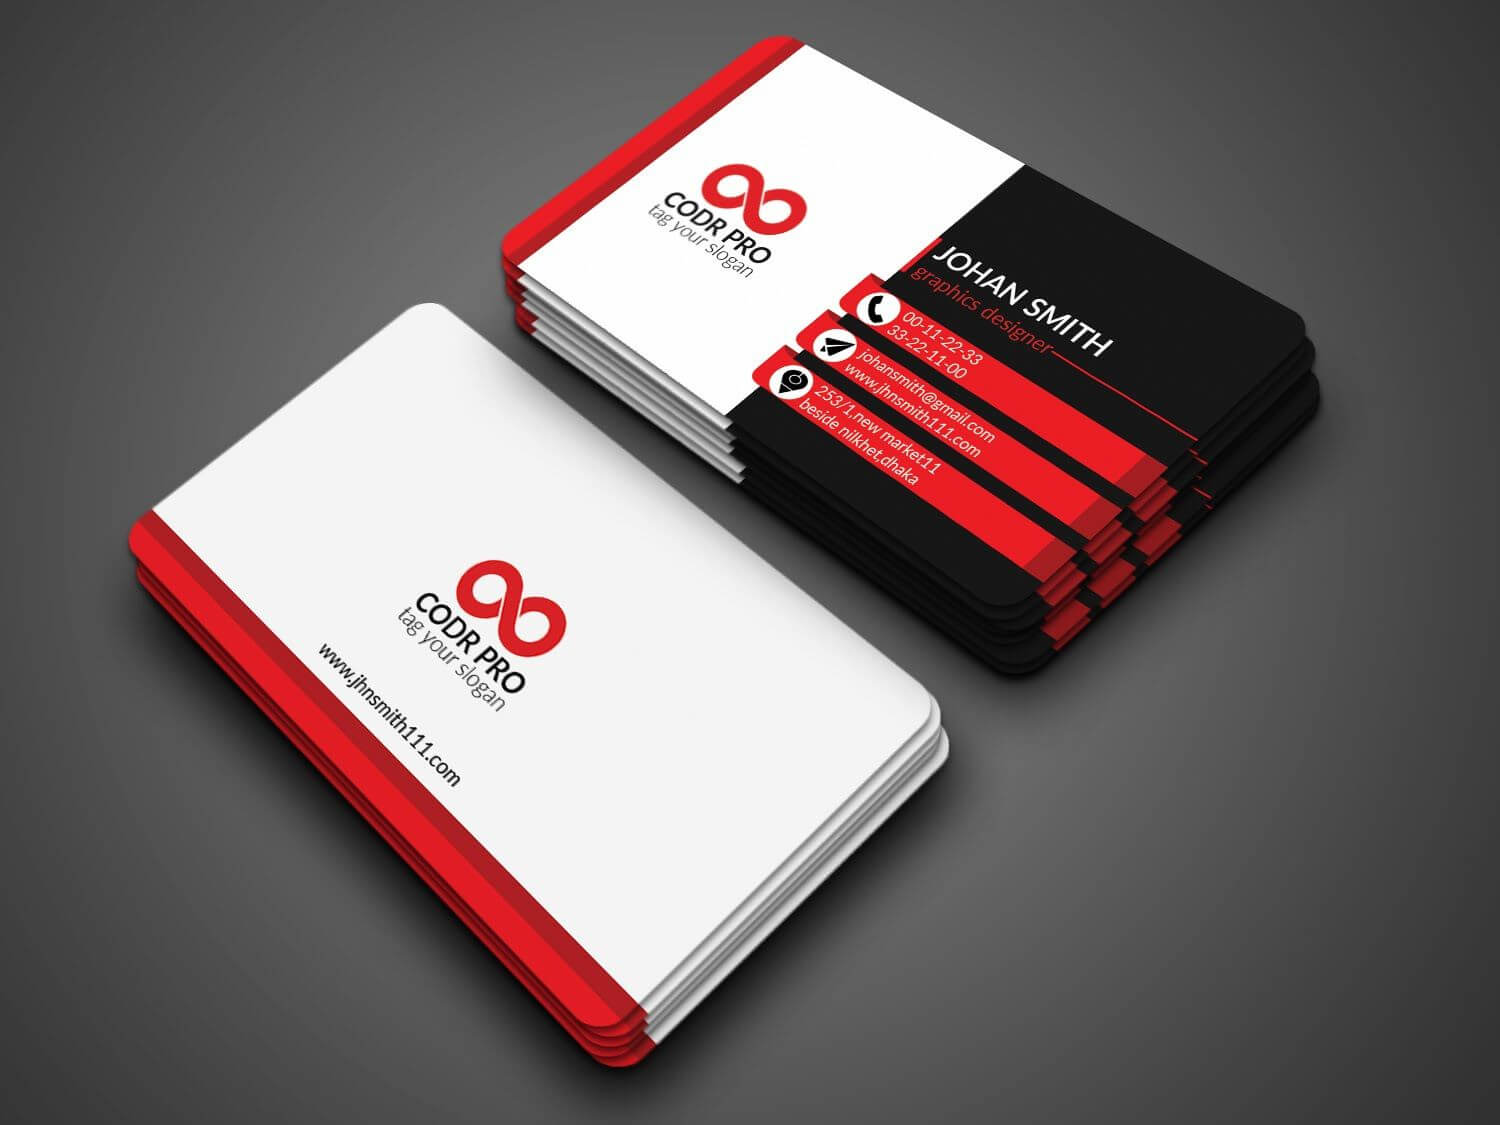 Professional Business Card Design In Photoshop Cs6 Tutorial With Photoshop Cs6 Business Card Template